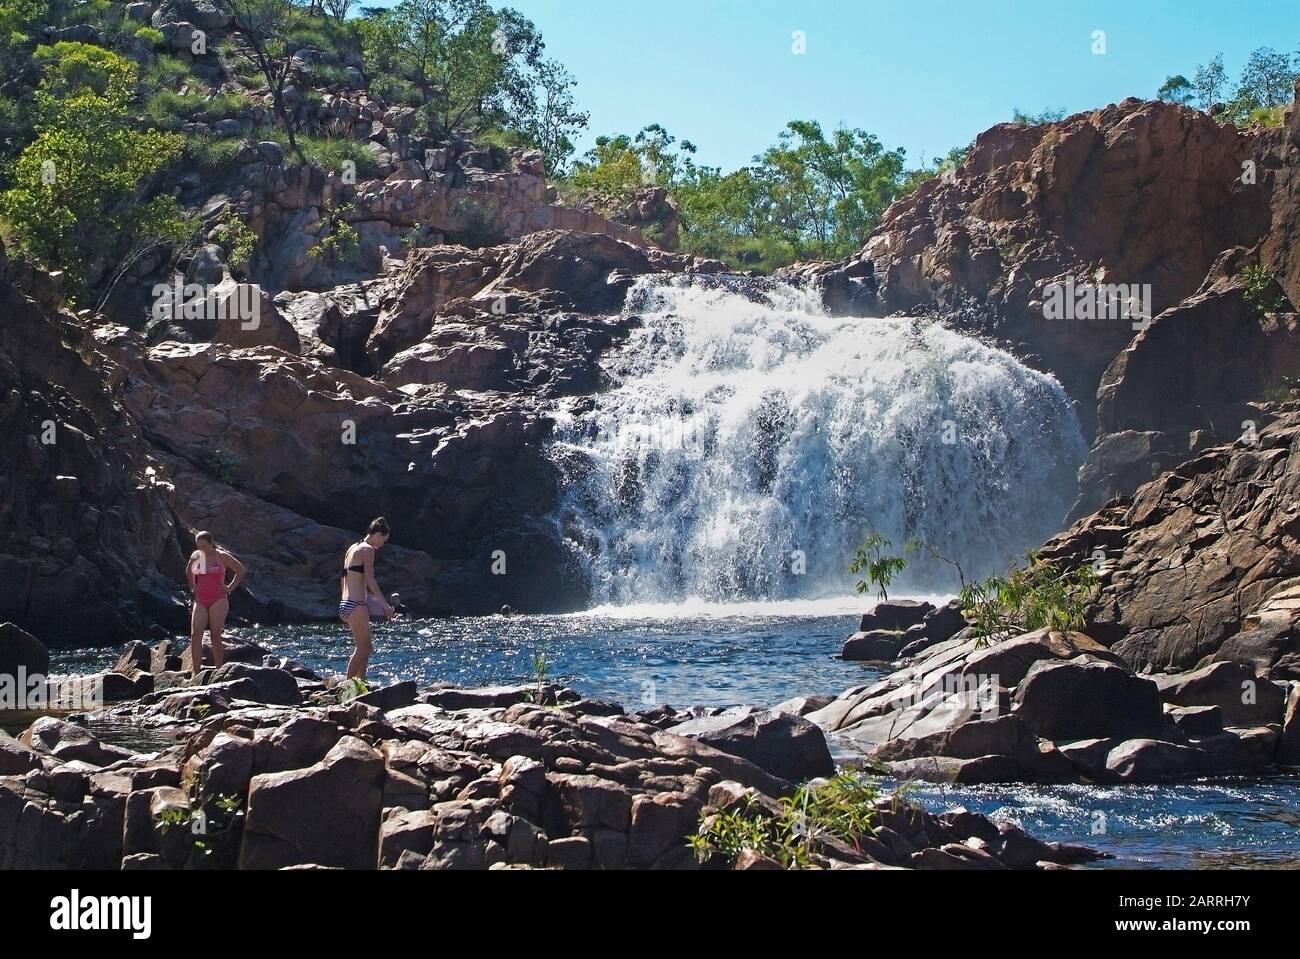 Katherine, NT, Australia - April 23, 2010: Unidentified people at Edith Falls in Nitmiluk National Park, Northern Territory Stock Photo